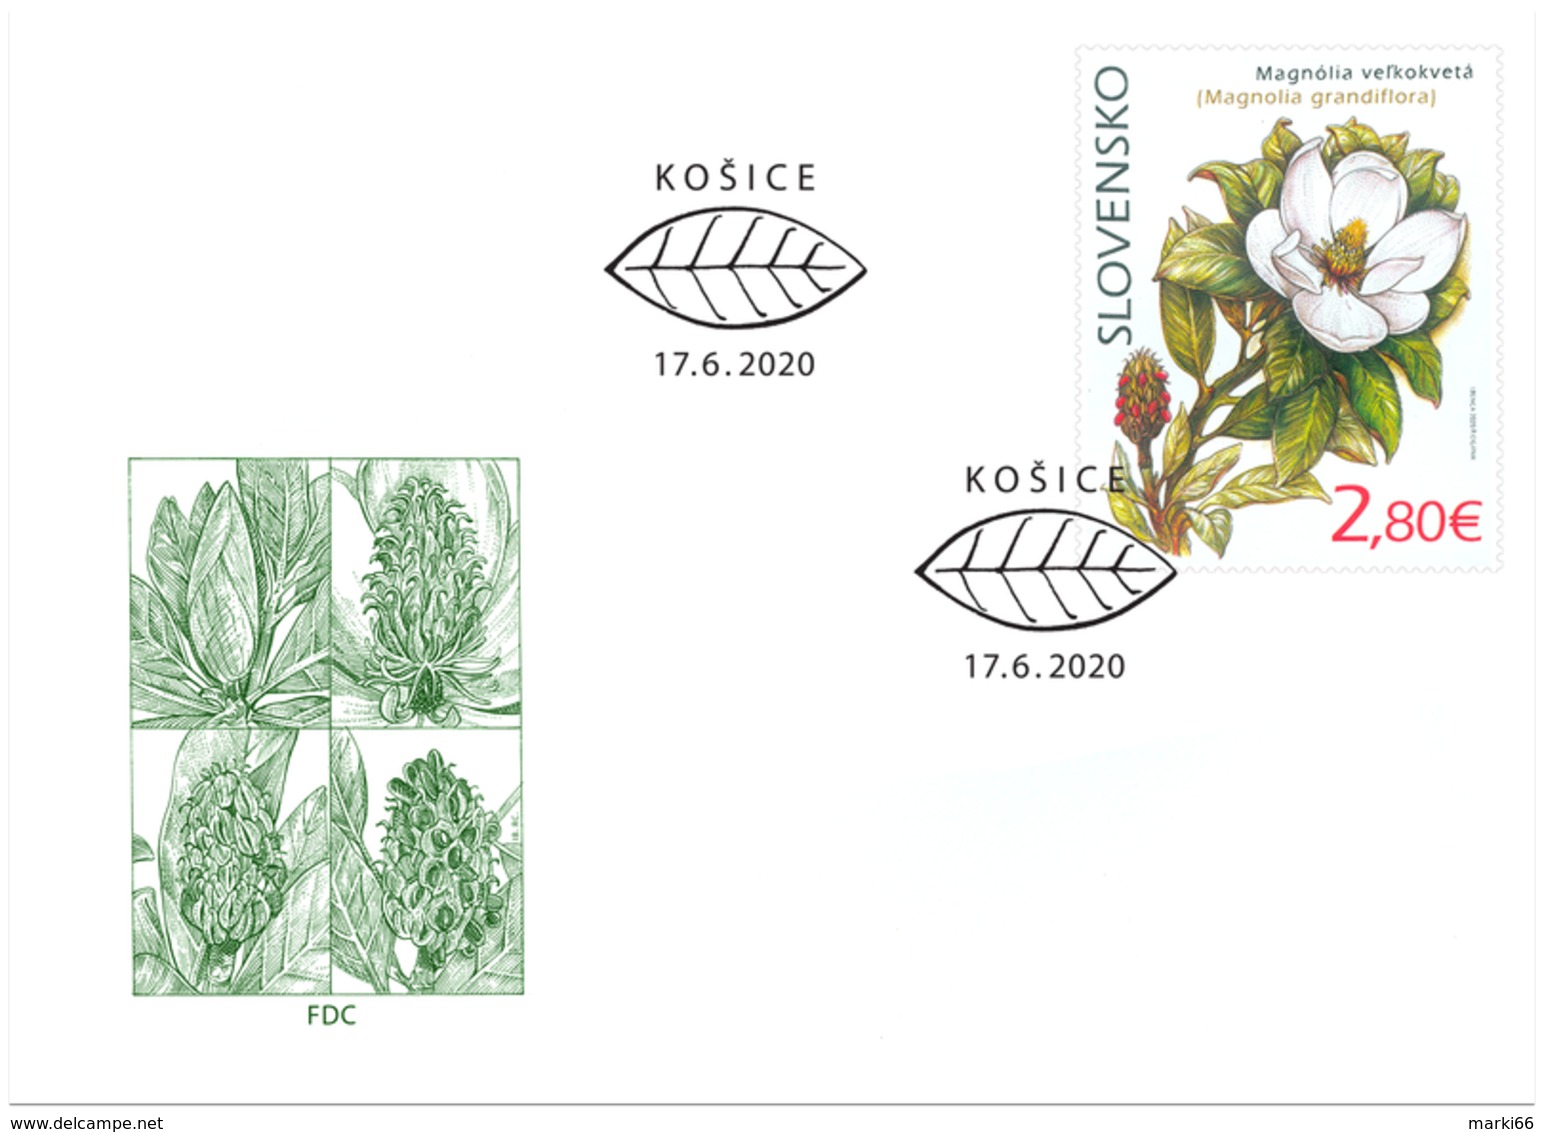 Slovakia - 2020 - Nature Protection - Košice Botanical Garden - Magnolia Grandiflora - FDC (first Day Cover) - FDC